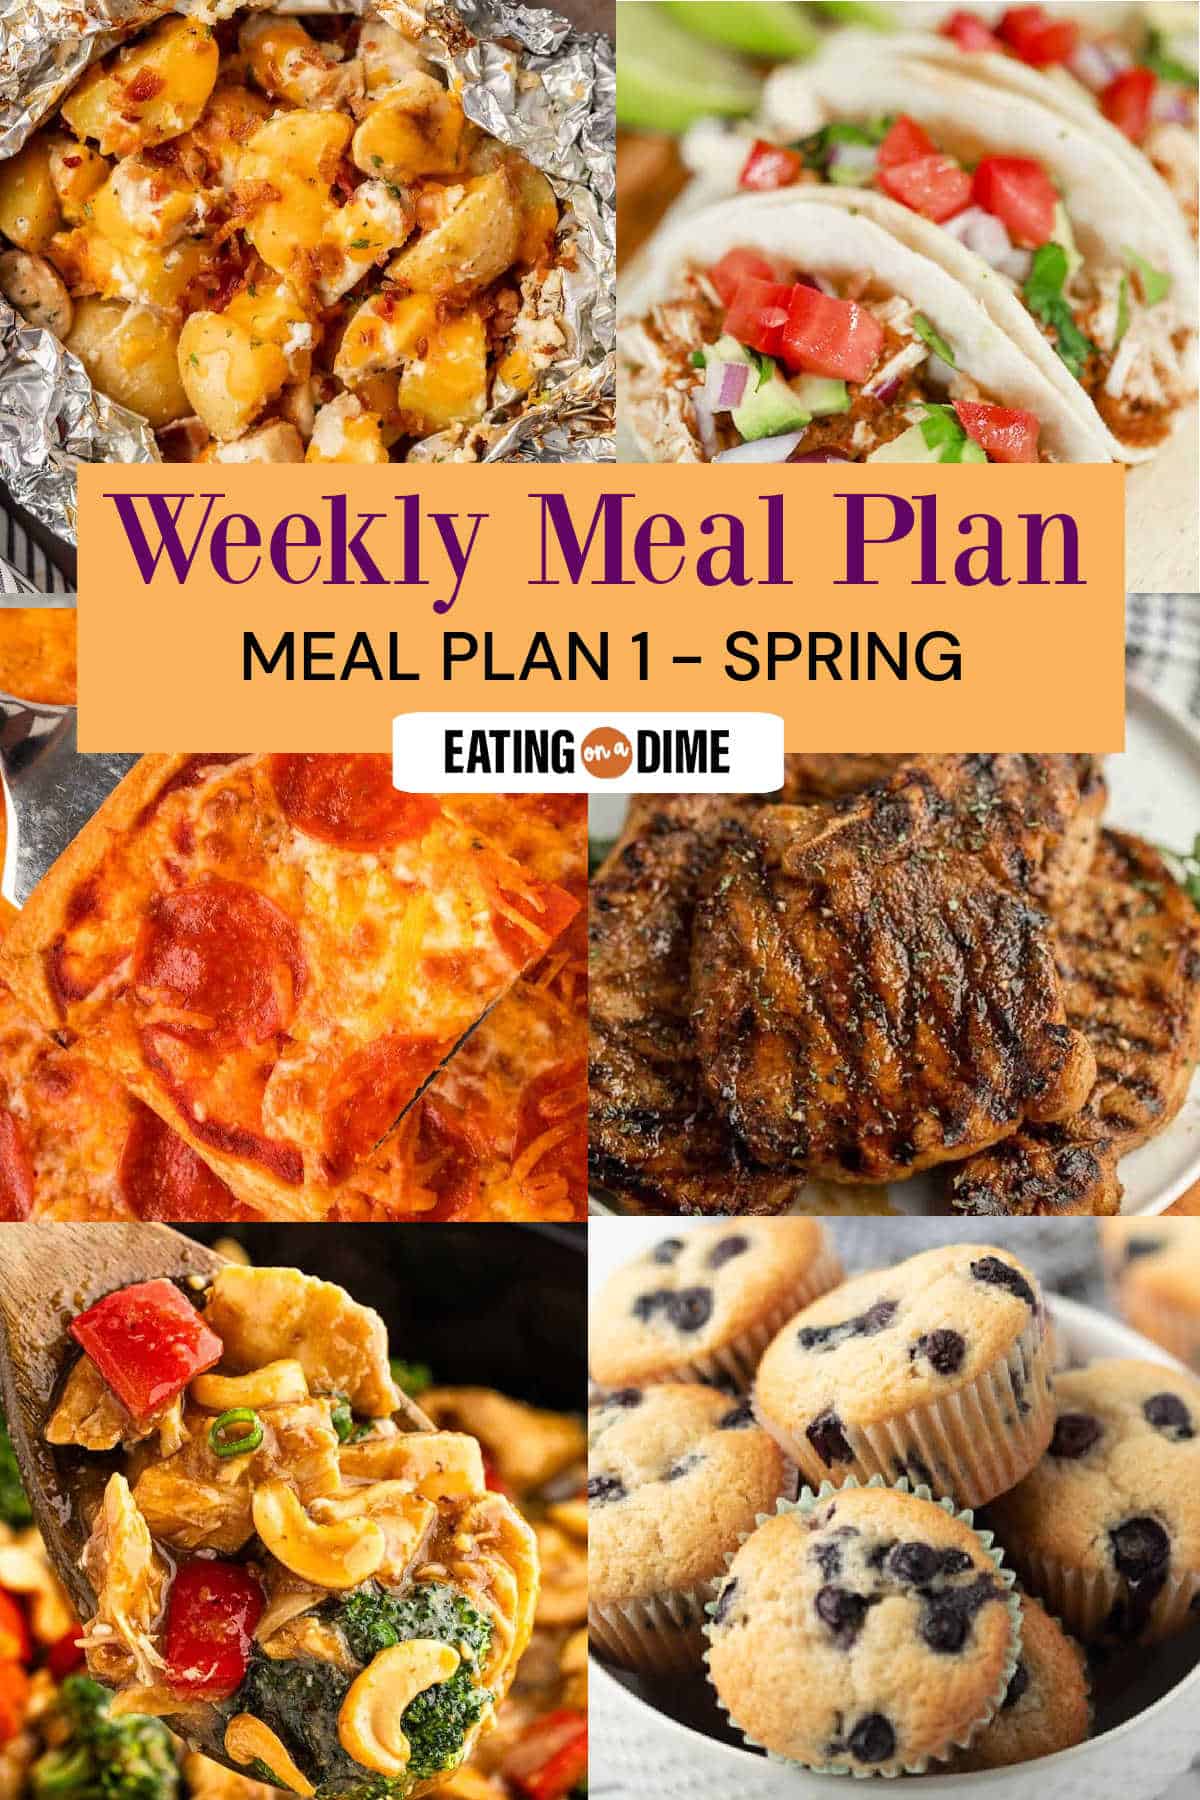 Picture of the meals from this week's meal plan: Crack Chicken Foil Packs, Chipotle Chicken Tacos, Crescent Roll Pizza, Pork Chop Marinade, Crock Pot Cashew Chicken and Blueberry Muffins 